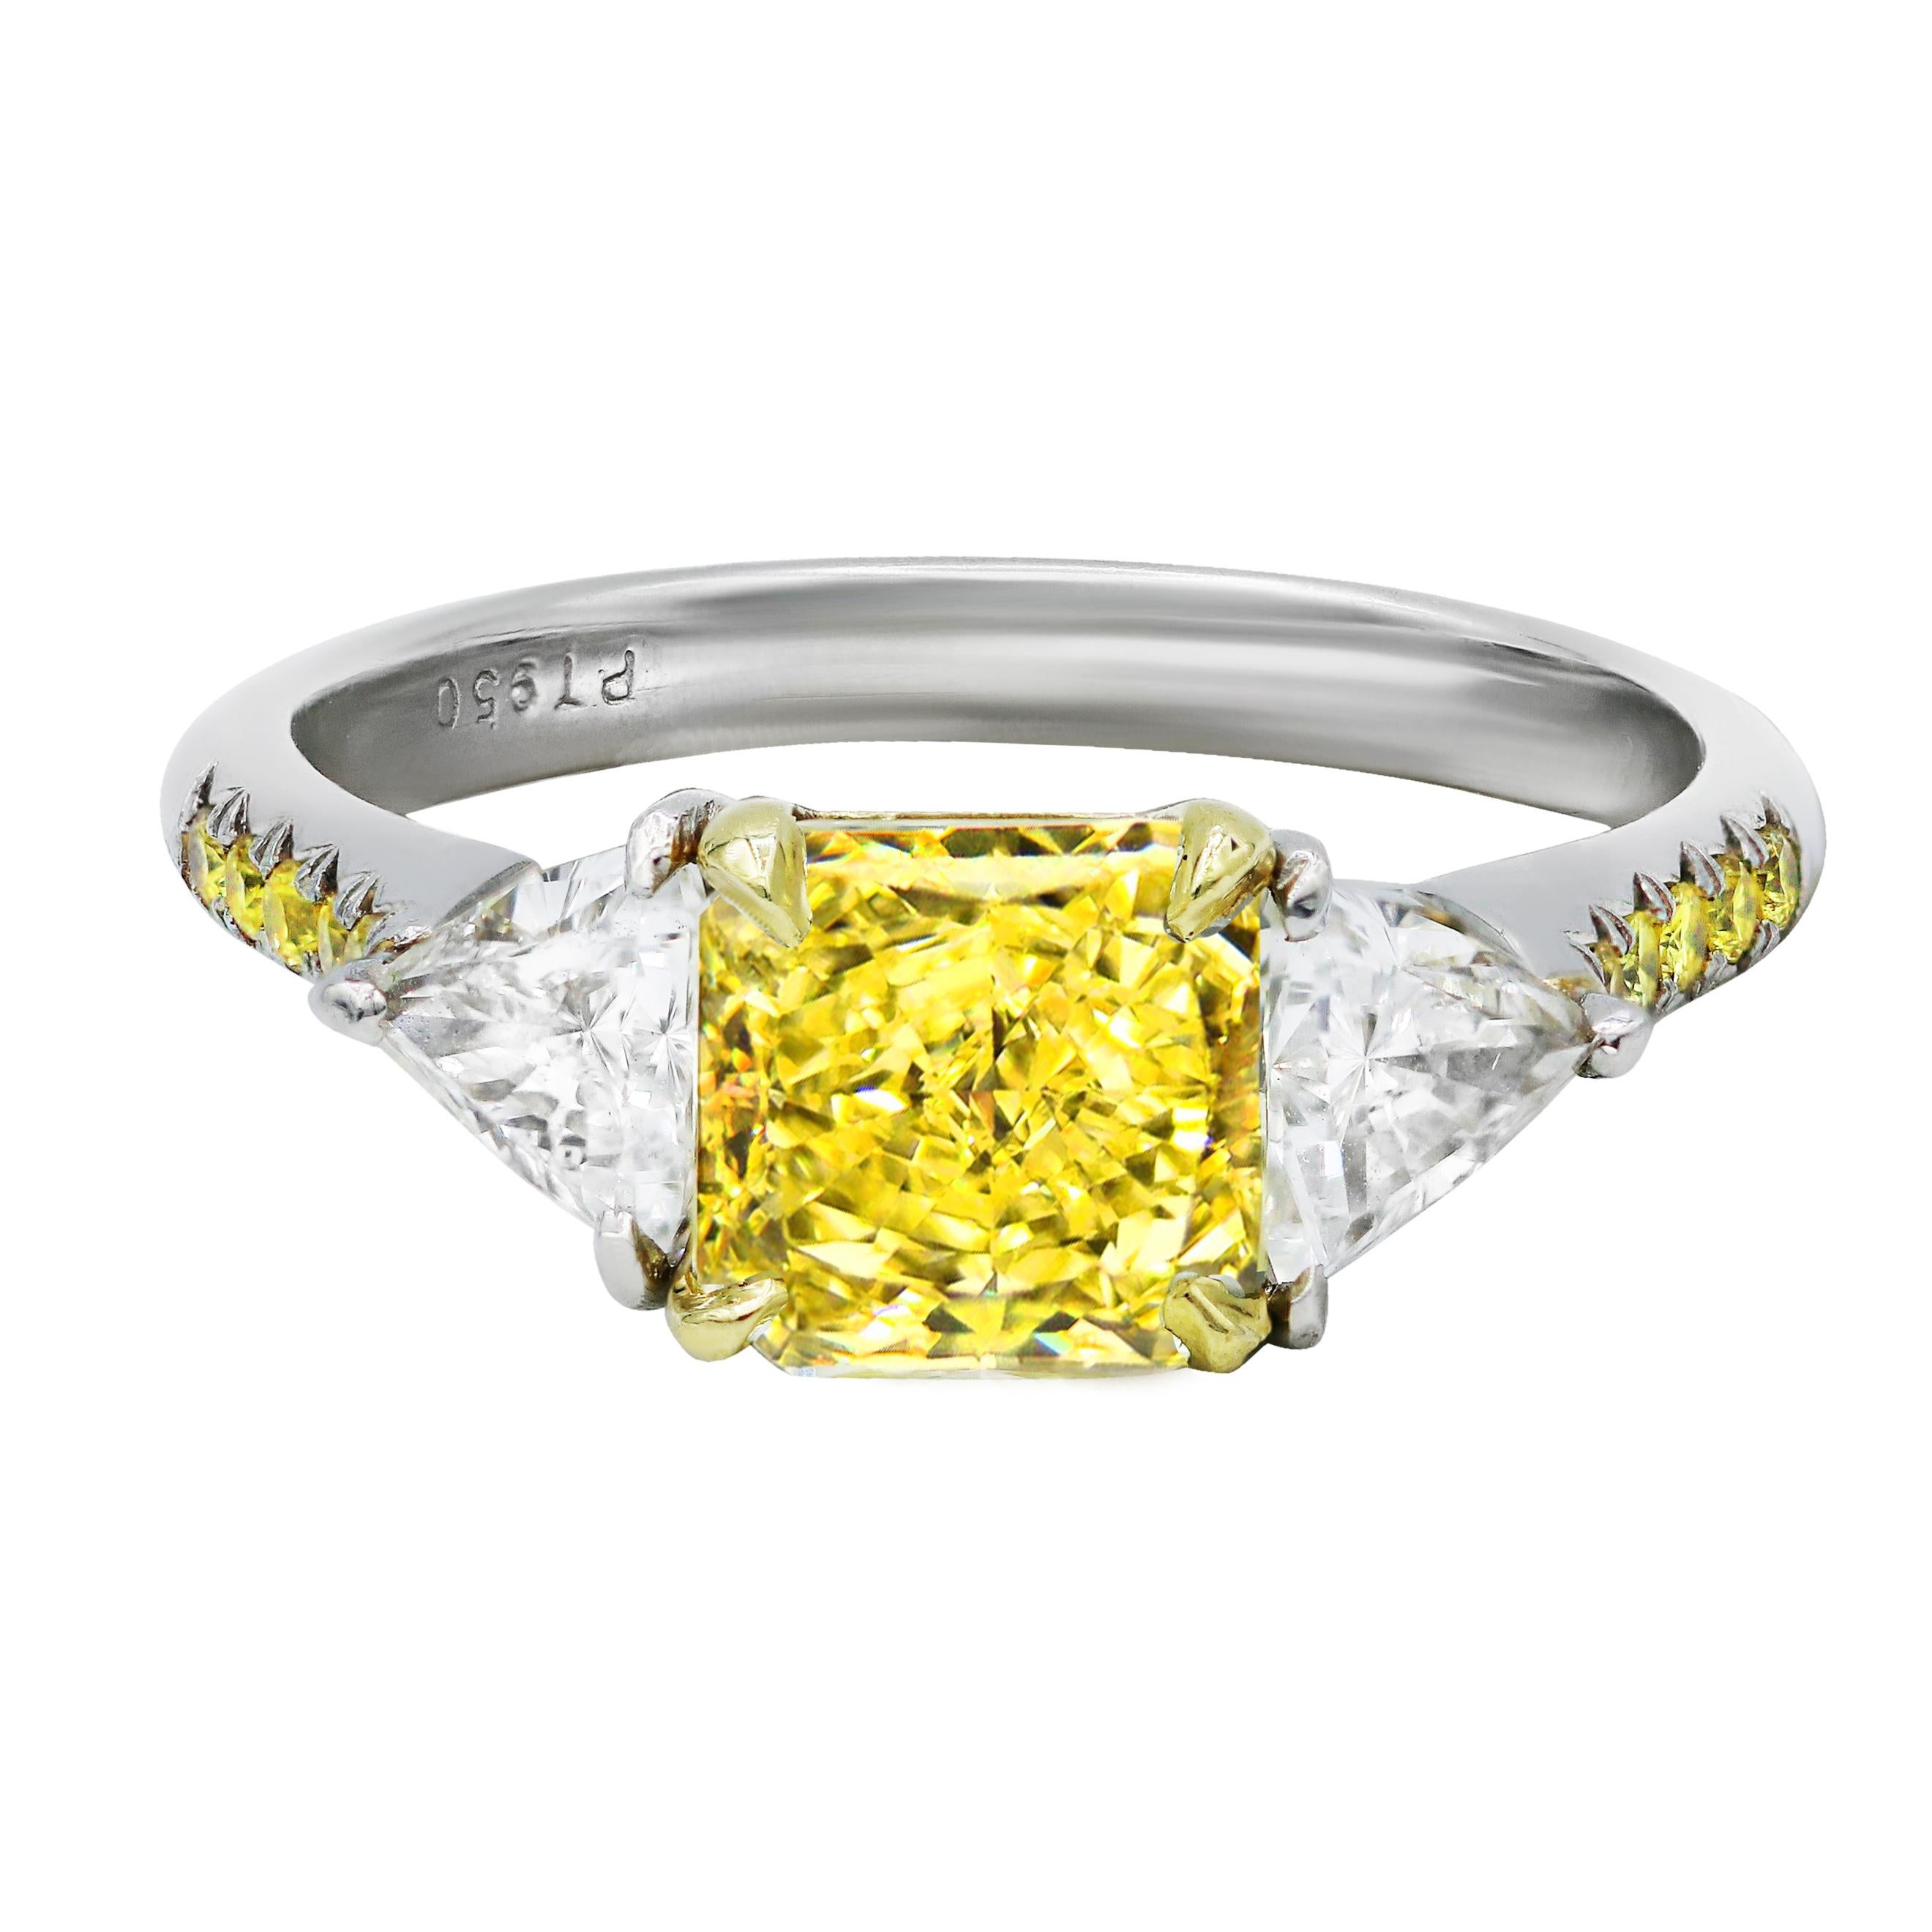 Modern Diana M. Platinum  1.42 ct radiant cut yellow diamond (FY VS2) engagement ring For Sale